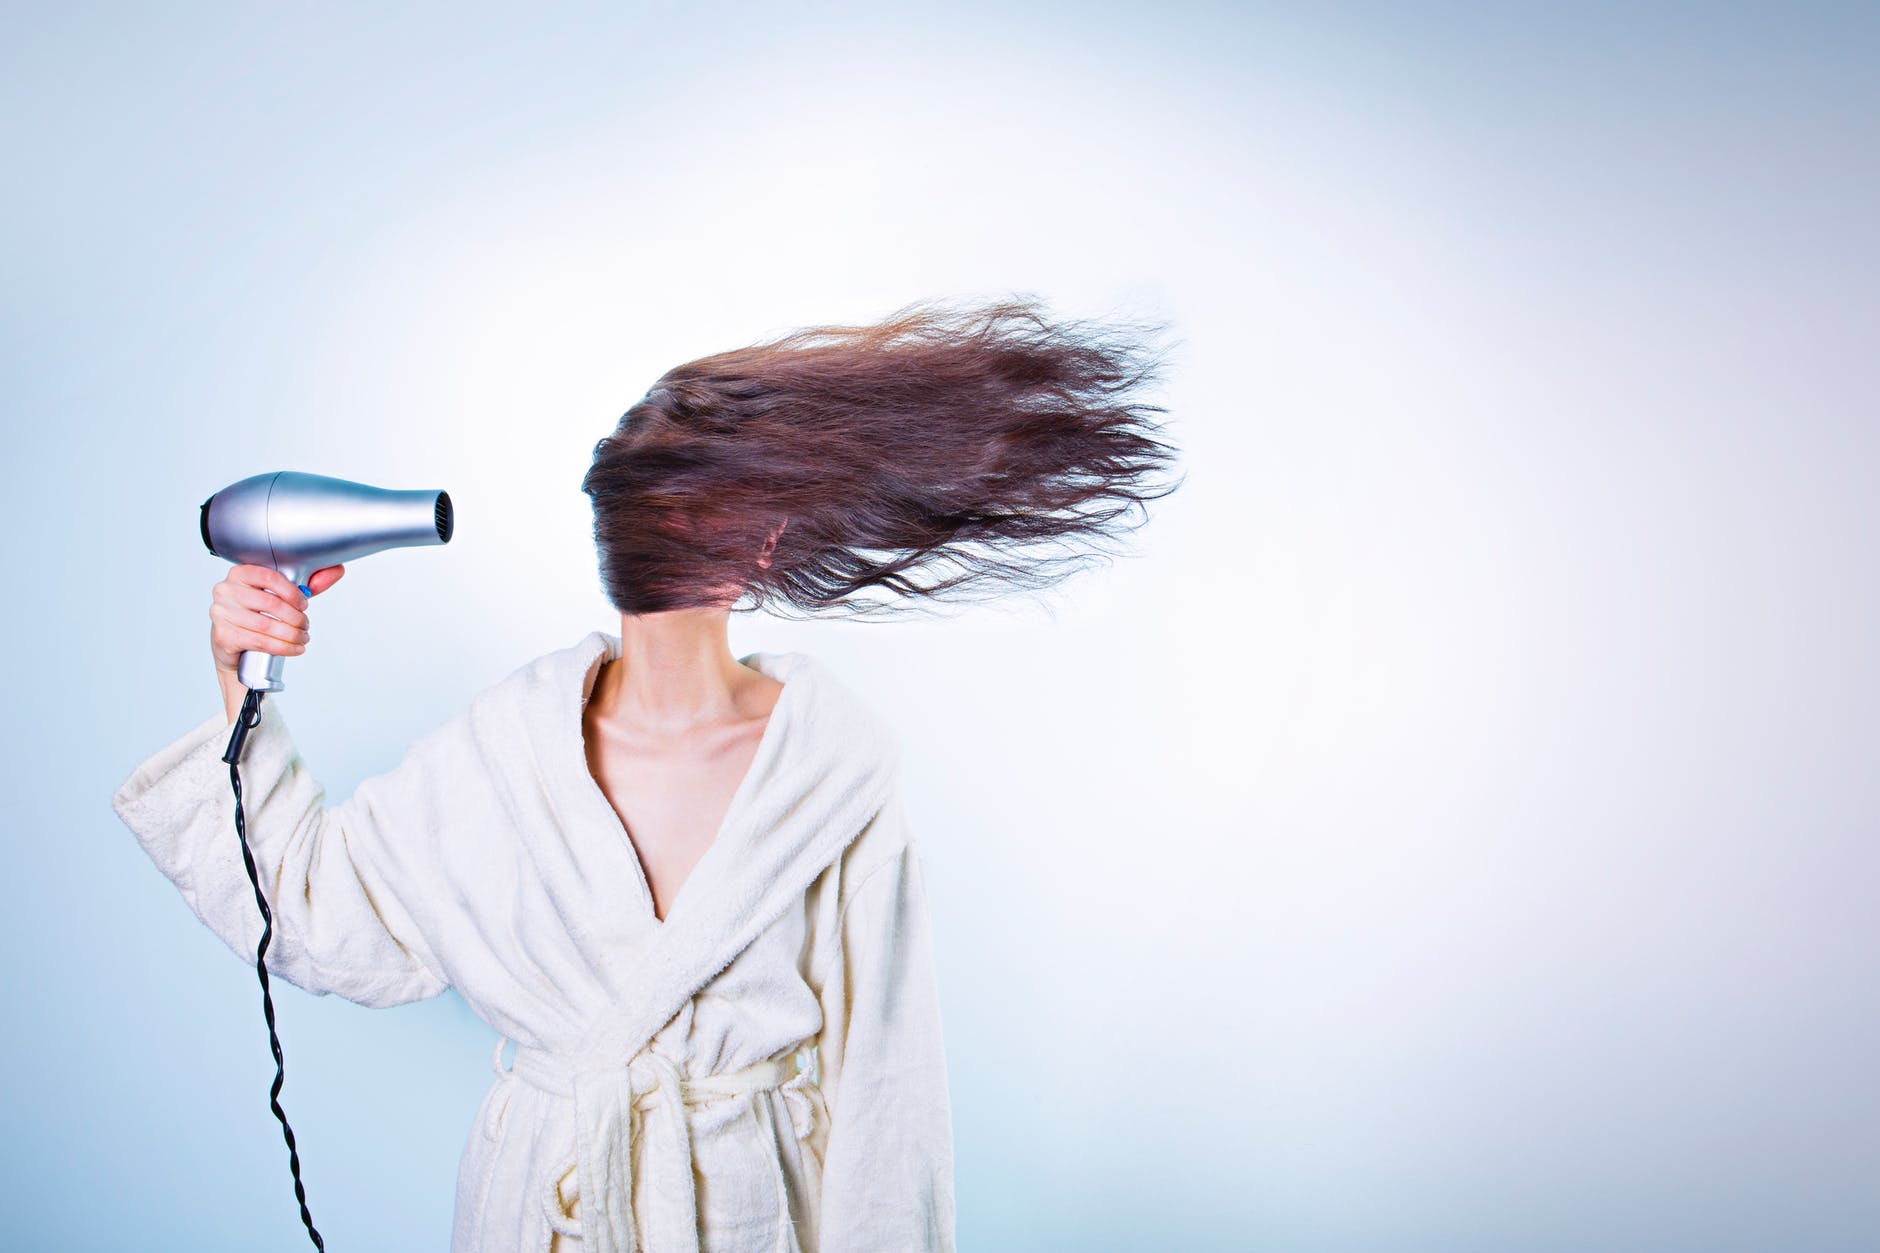 Don't get stuck in a rut header image shows person in a bathrobe, with a hair dryer blowing hair across their face.